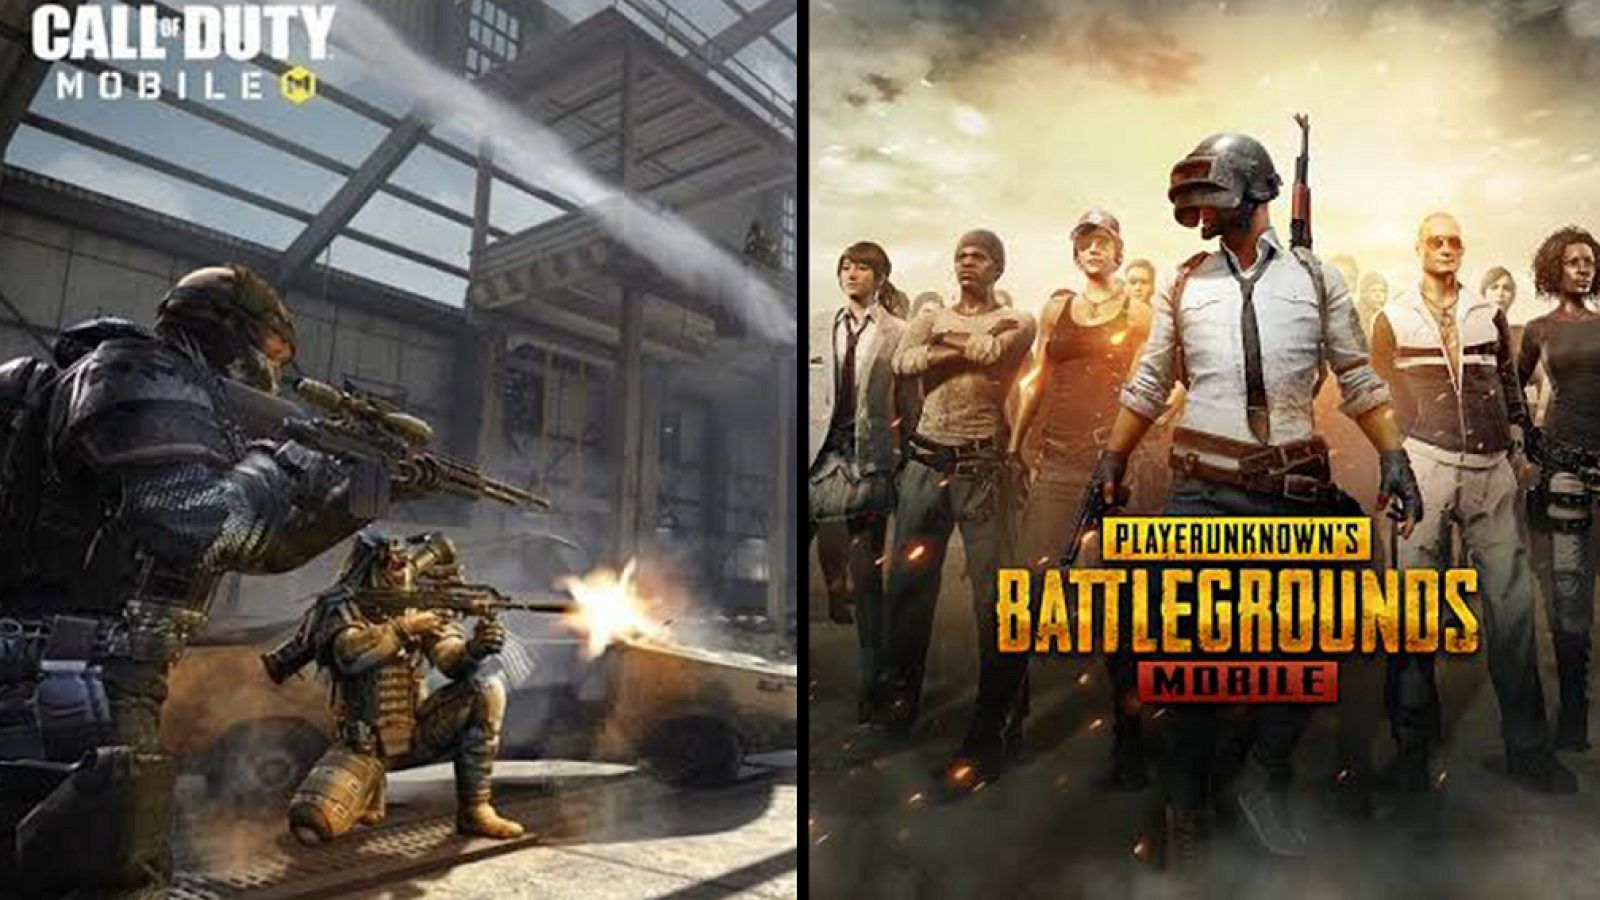 PUBG Mobile streamer banned from event after playing CoD Mobile